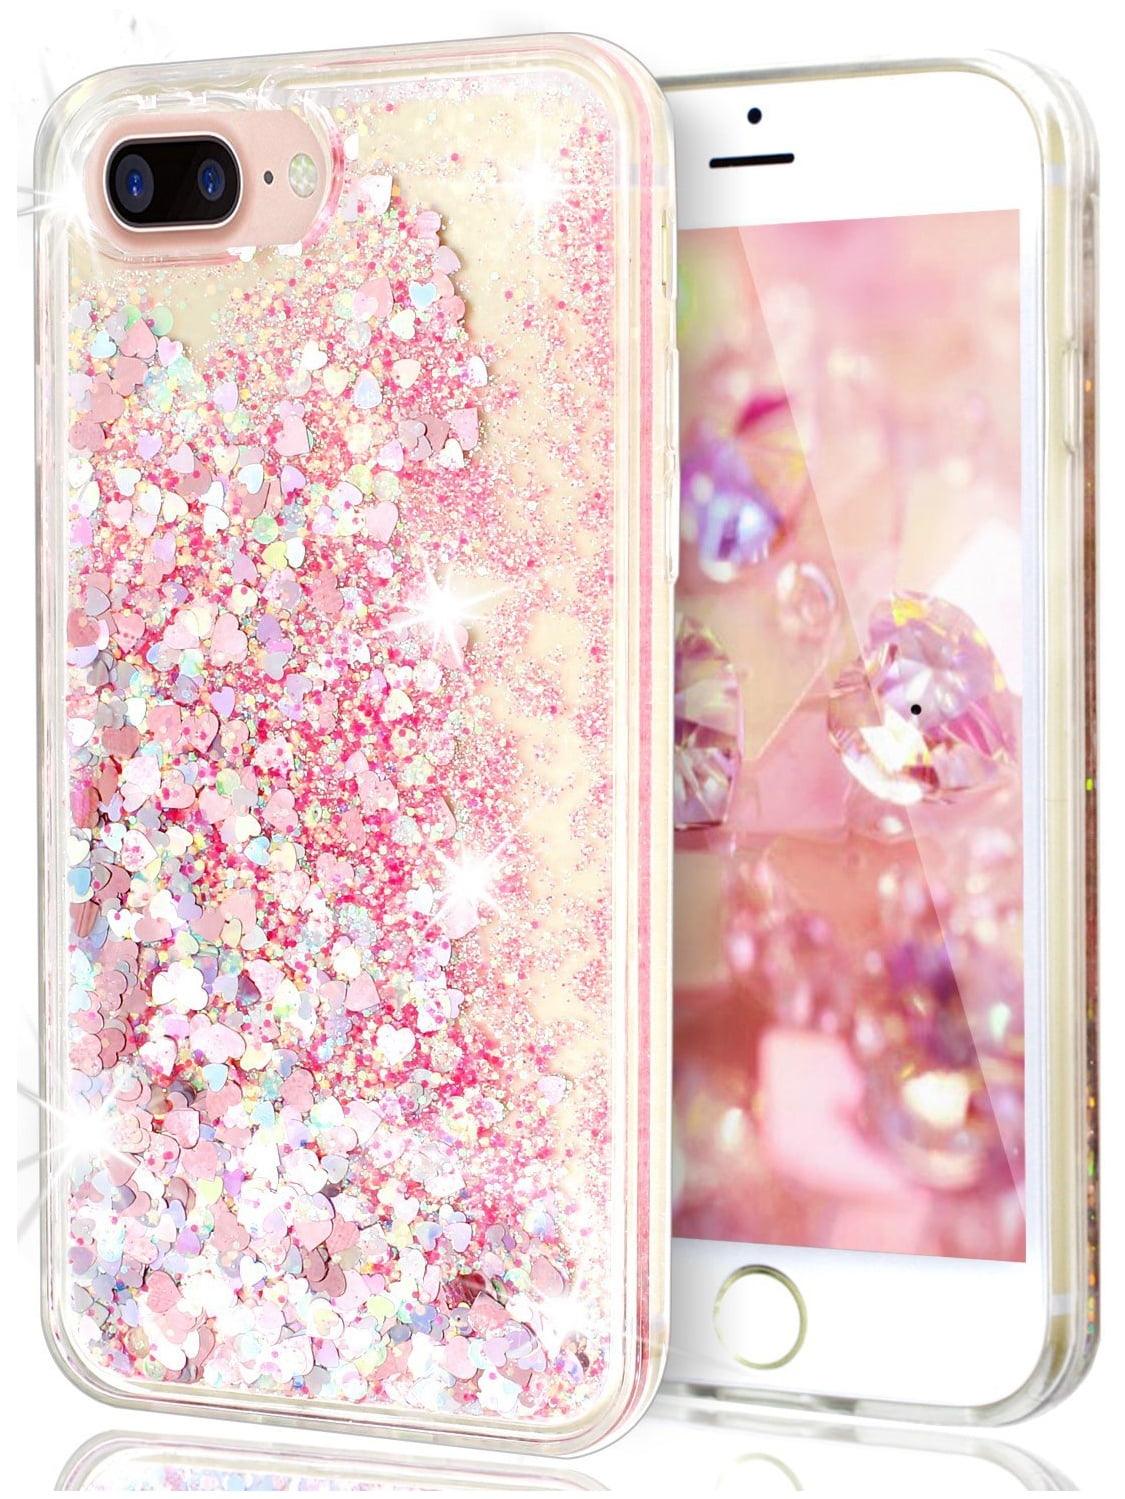 Case for iPhone 6/6S Hancda TPU Silicone Gel Soft Glitter Bling Case Flexible Anti Scratch Ultra Slim Fit Rubber Skin Cover for iPhone 6/6S 4.7 Inch Pink and Blue 